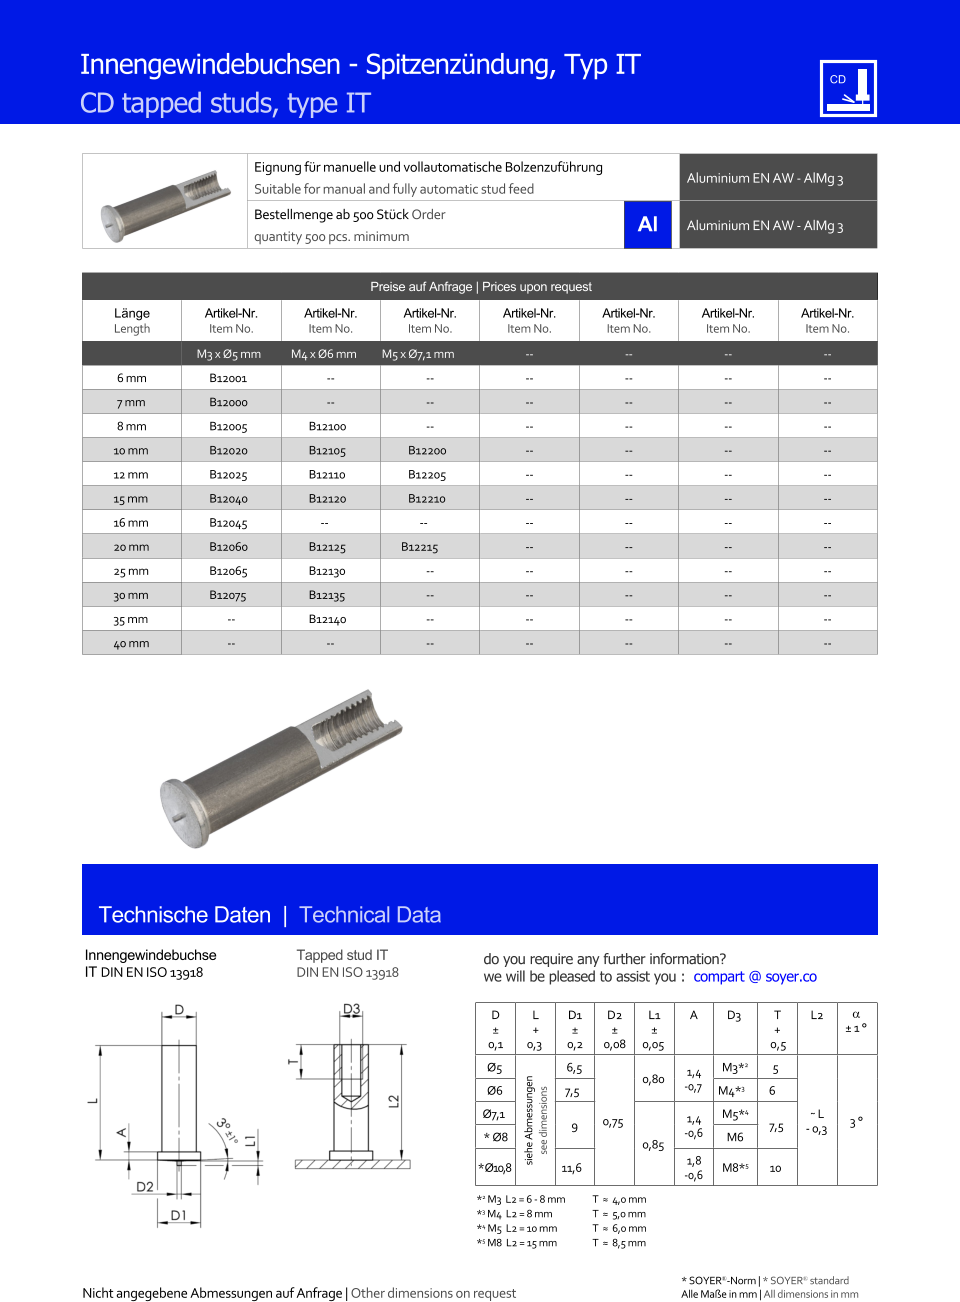 Eignung fr manuelle und vollautomatische Bolzenzufhrung Suitable for manual and fully automatic stud feed Aluminium EN AW - AlMg 3  Bestellmenge ab 500 Stck Order quantity 500 pcs. minimum Aluminium EN AW - AlMg 3 Technische Daten  |  Technical Data Preise auf Anfrage | Prices upon request  Lnge Length Artikel-Nr. Item No. Artikel-Nr. Item No. Artikel-Nr. Item No. Artikel-Nr. Item No. Artikel-Nr. Item No. Artikel-Nr. Item No. Artikel-Nr. Item No. M3 x Ø5 mm M4 x Ø6 mm M5 x Ø7,1 mm 	-- 	-- 	-- 	-- 6 mm 	B12001 	-- 	-- 	-- 	-- 	-- 	-- 7 mm 	B12000 	-- 	-- 	-- 	-- 	-- 	-- 8 mm 	B12005 	B12100 	-- 	-- 	-- 	-- 	-- 10 mm 	B12020 	B12105 	B12200 	-- 	-- 	-- 	-- 12 mm 	B12025 	B12110 	B12205 	-- 	-- 	-- 	-- 15 mm 	B12040 	B12120 	B12210 	-- 	-- 	-- 	-- 16 mm 	B12045 -- -- 	-- 	-- 	-- 	-- 20 mm 	B12060 	B12125 B12215 	-- 	-- 	-- 	-- 25 mm 	B12065 	B12130 	-- 	-- 	-- 	-- 	-- 30 mm 	B12075 	B12135 	-- 	-- 	-- 	-- 	-- 35 mm 	-- 	B12140 	-- 	-- 	-- 	-- 	-- 40 mm 	-- -- 	-- 	-- 	-- 	-- 	-- Innengewindebuchsen - Spitzenzndung, Typ IT CD tapped studs, type IT Innengewindebuchse IT DIN EN ISO 13918 Tapped stud IT DIN EN ISO 13918 D  0,1 L + 0,3 D1  0,2 D2  0,08 L1  0,05 A D3 	T + 0,5 L2   1  Ø5 siehe Abmessungen see dimensions 6,5 0,75 0,80 1,4 -0,7 M3*2 5 ˜ L - 0,3 3  Ø6 7,5 M4*3 6  Ø7,1 9 0,85 1,4 -0,6 M5*4 7,5 * Ø8 M6 * Ø10,8 11,6 1,8 -0,6 M8*5 10 *2 M3  L2 = 6 - 8 mm 	T  ≈  4,0 mm *3 M4  L2 = 8 mm  	T  ≈  5,0 mm *4 M5  L2 = 10 mm 	T  ≈  6,0 mm *5 M8  L2 = 15 mm 	T  ≈  8,5 mm Nicht angegebene Abmessungen auf Anfrage | Other dimensions on request 	Alle Mae in mm | All dimensions in mm * SOYER-Norm | * SOYER standard do you require any further information?  we will be pleased to assist you :  compart @ soyer.co